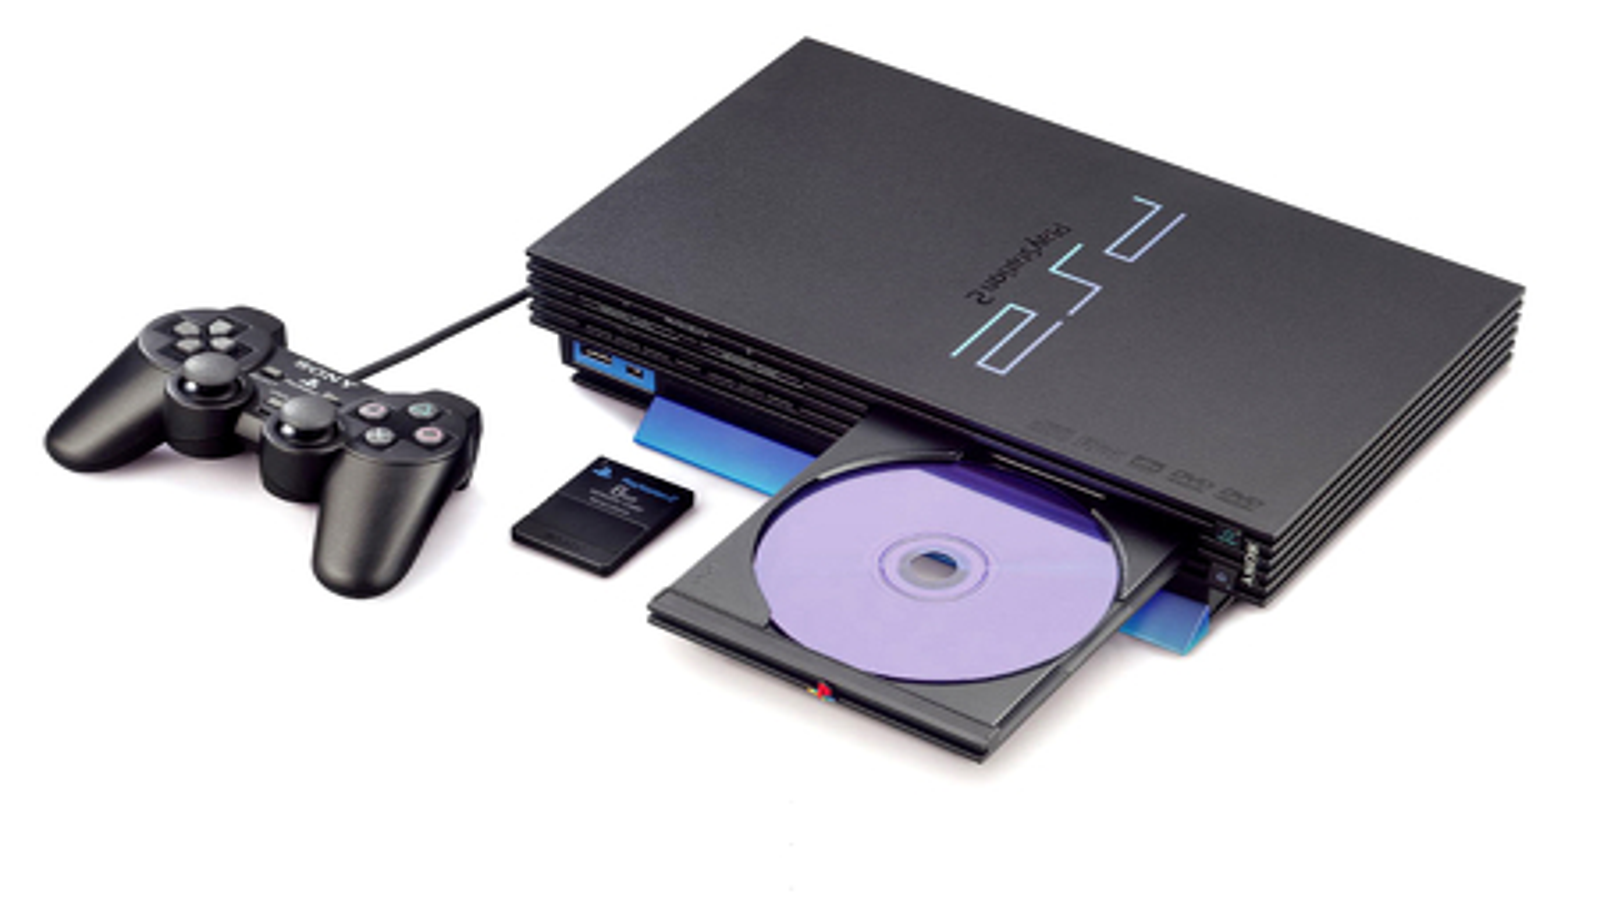 Replicate face to many ps2. Sony PLAYSTATION 2 ps2. Sony ps2 fat. Sony PLAYSTATION 2 fat. Sony PLAYSTATION 2 Slim fat.